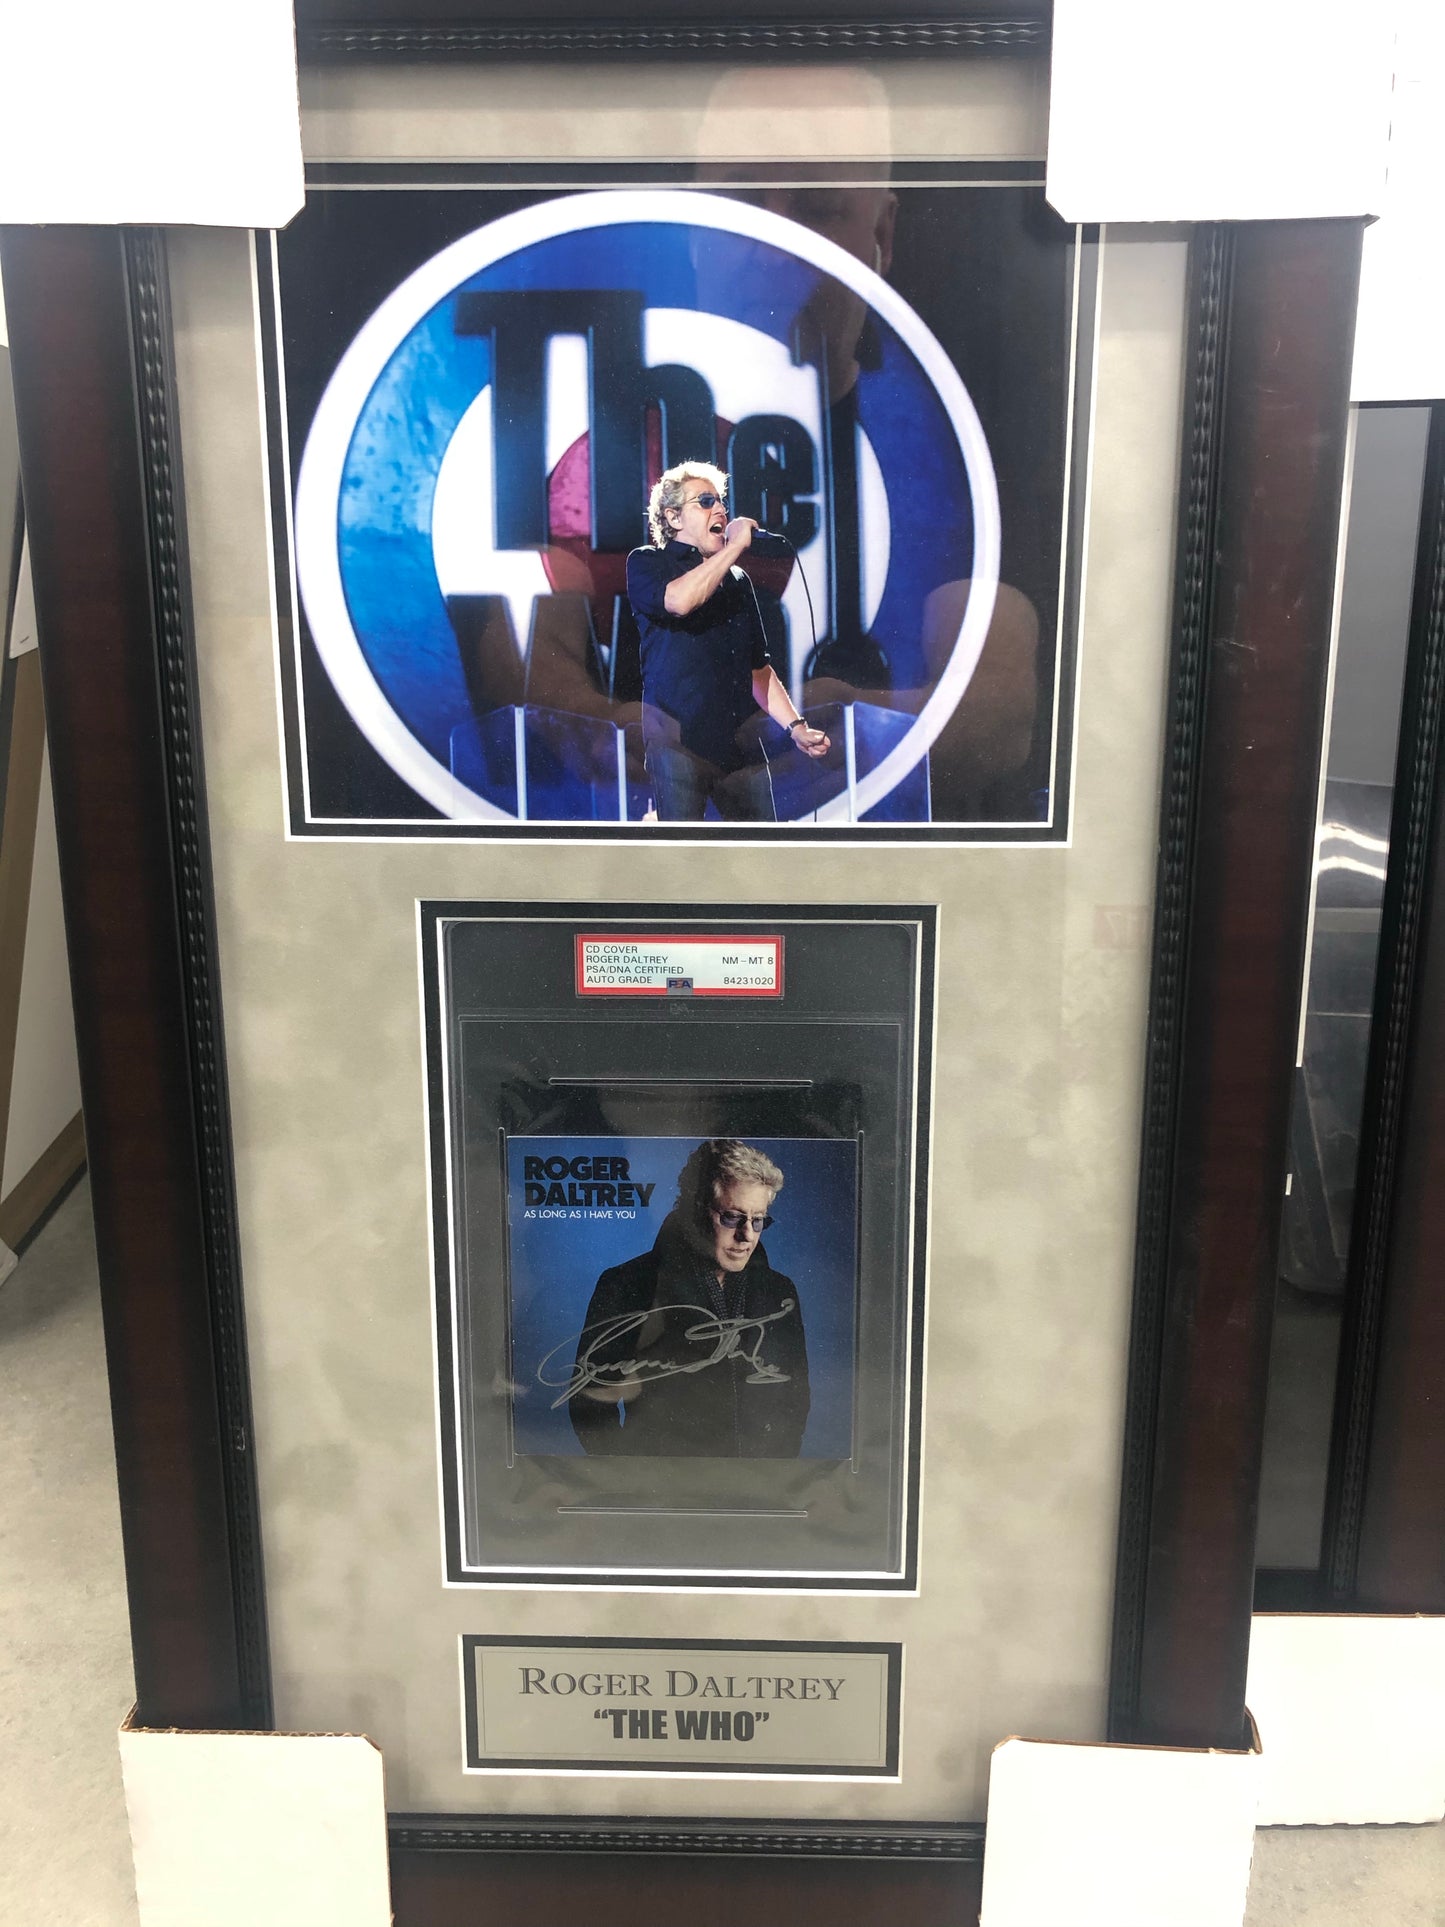 THE WHO Roger Daltrey signed and framed signed graded slab by PSA